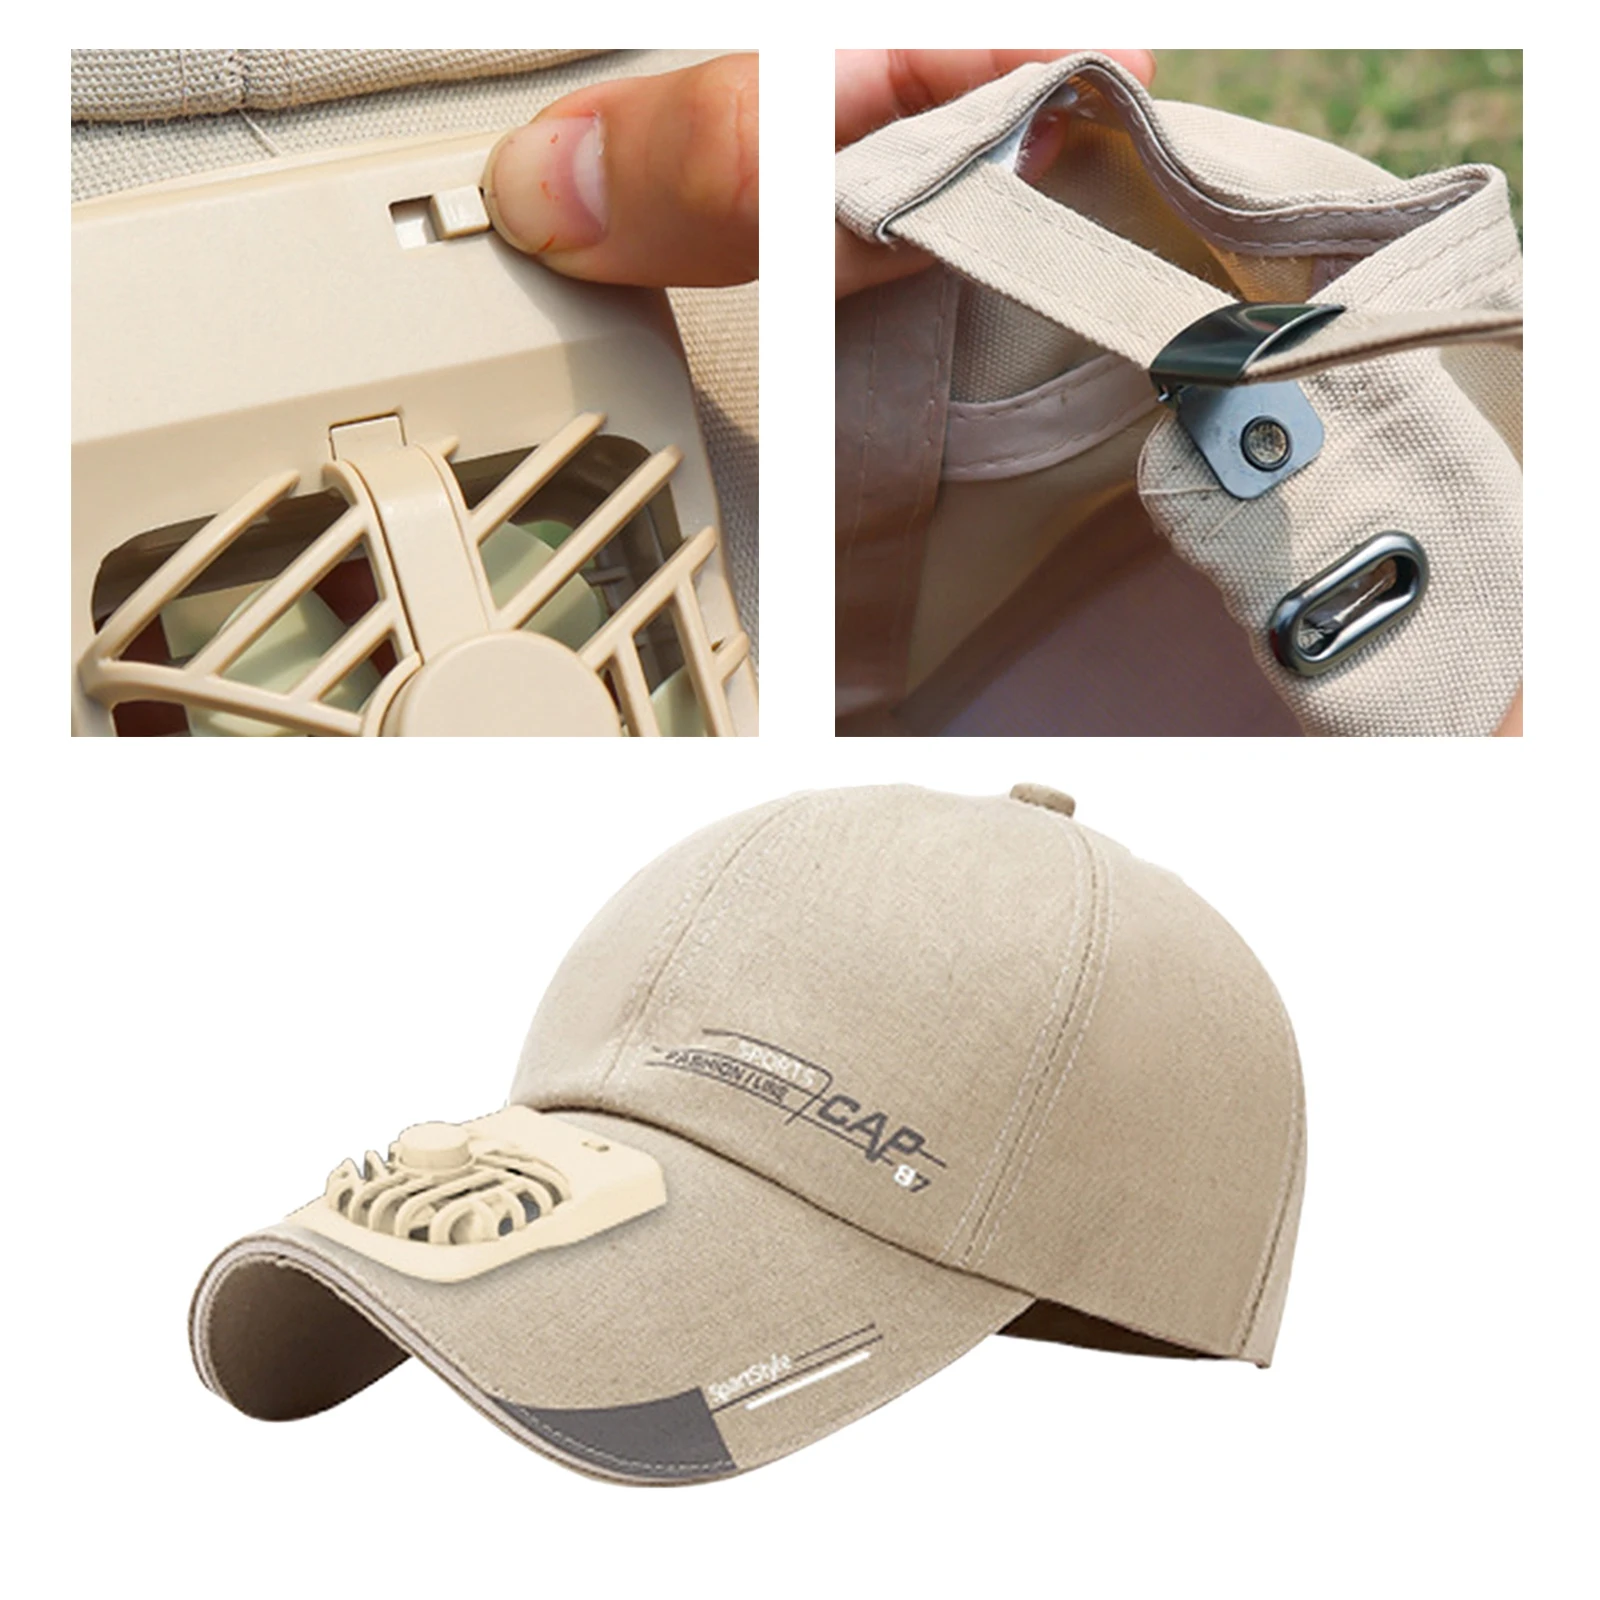 Baseball Cap with Fan USB Summer Outdoor Sun Hat Cap,The Cooling Fan for Golf Baseball Sport Outdoor Camping Backpacking